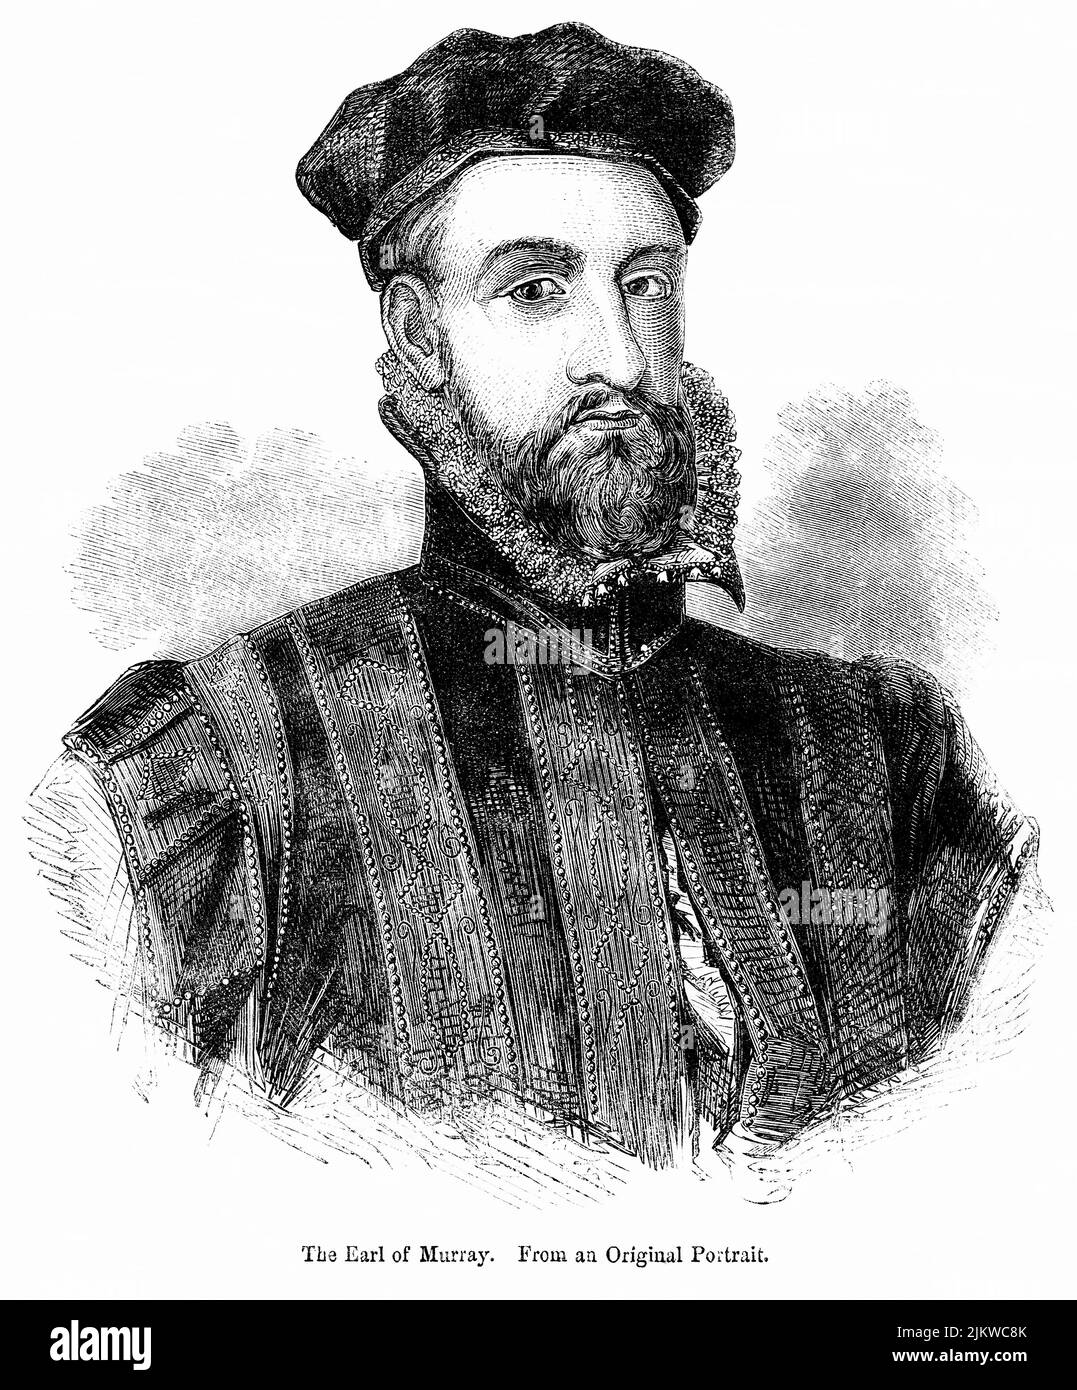 The Earl of Murray (Moray), Illustration from the Book, 'John Cassel’s Illustrated History of England, Volume II', text by William Howitt, Cassell, Petter, and Galpin, London, 1858 Stock Photo